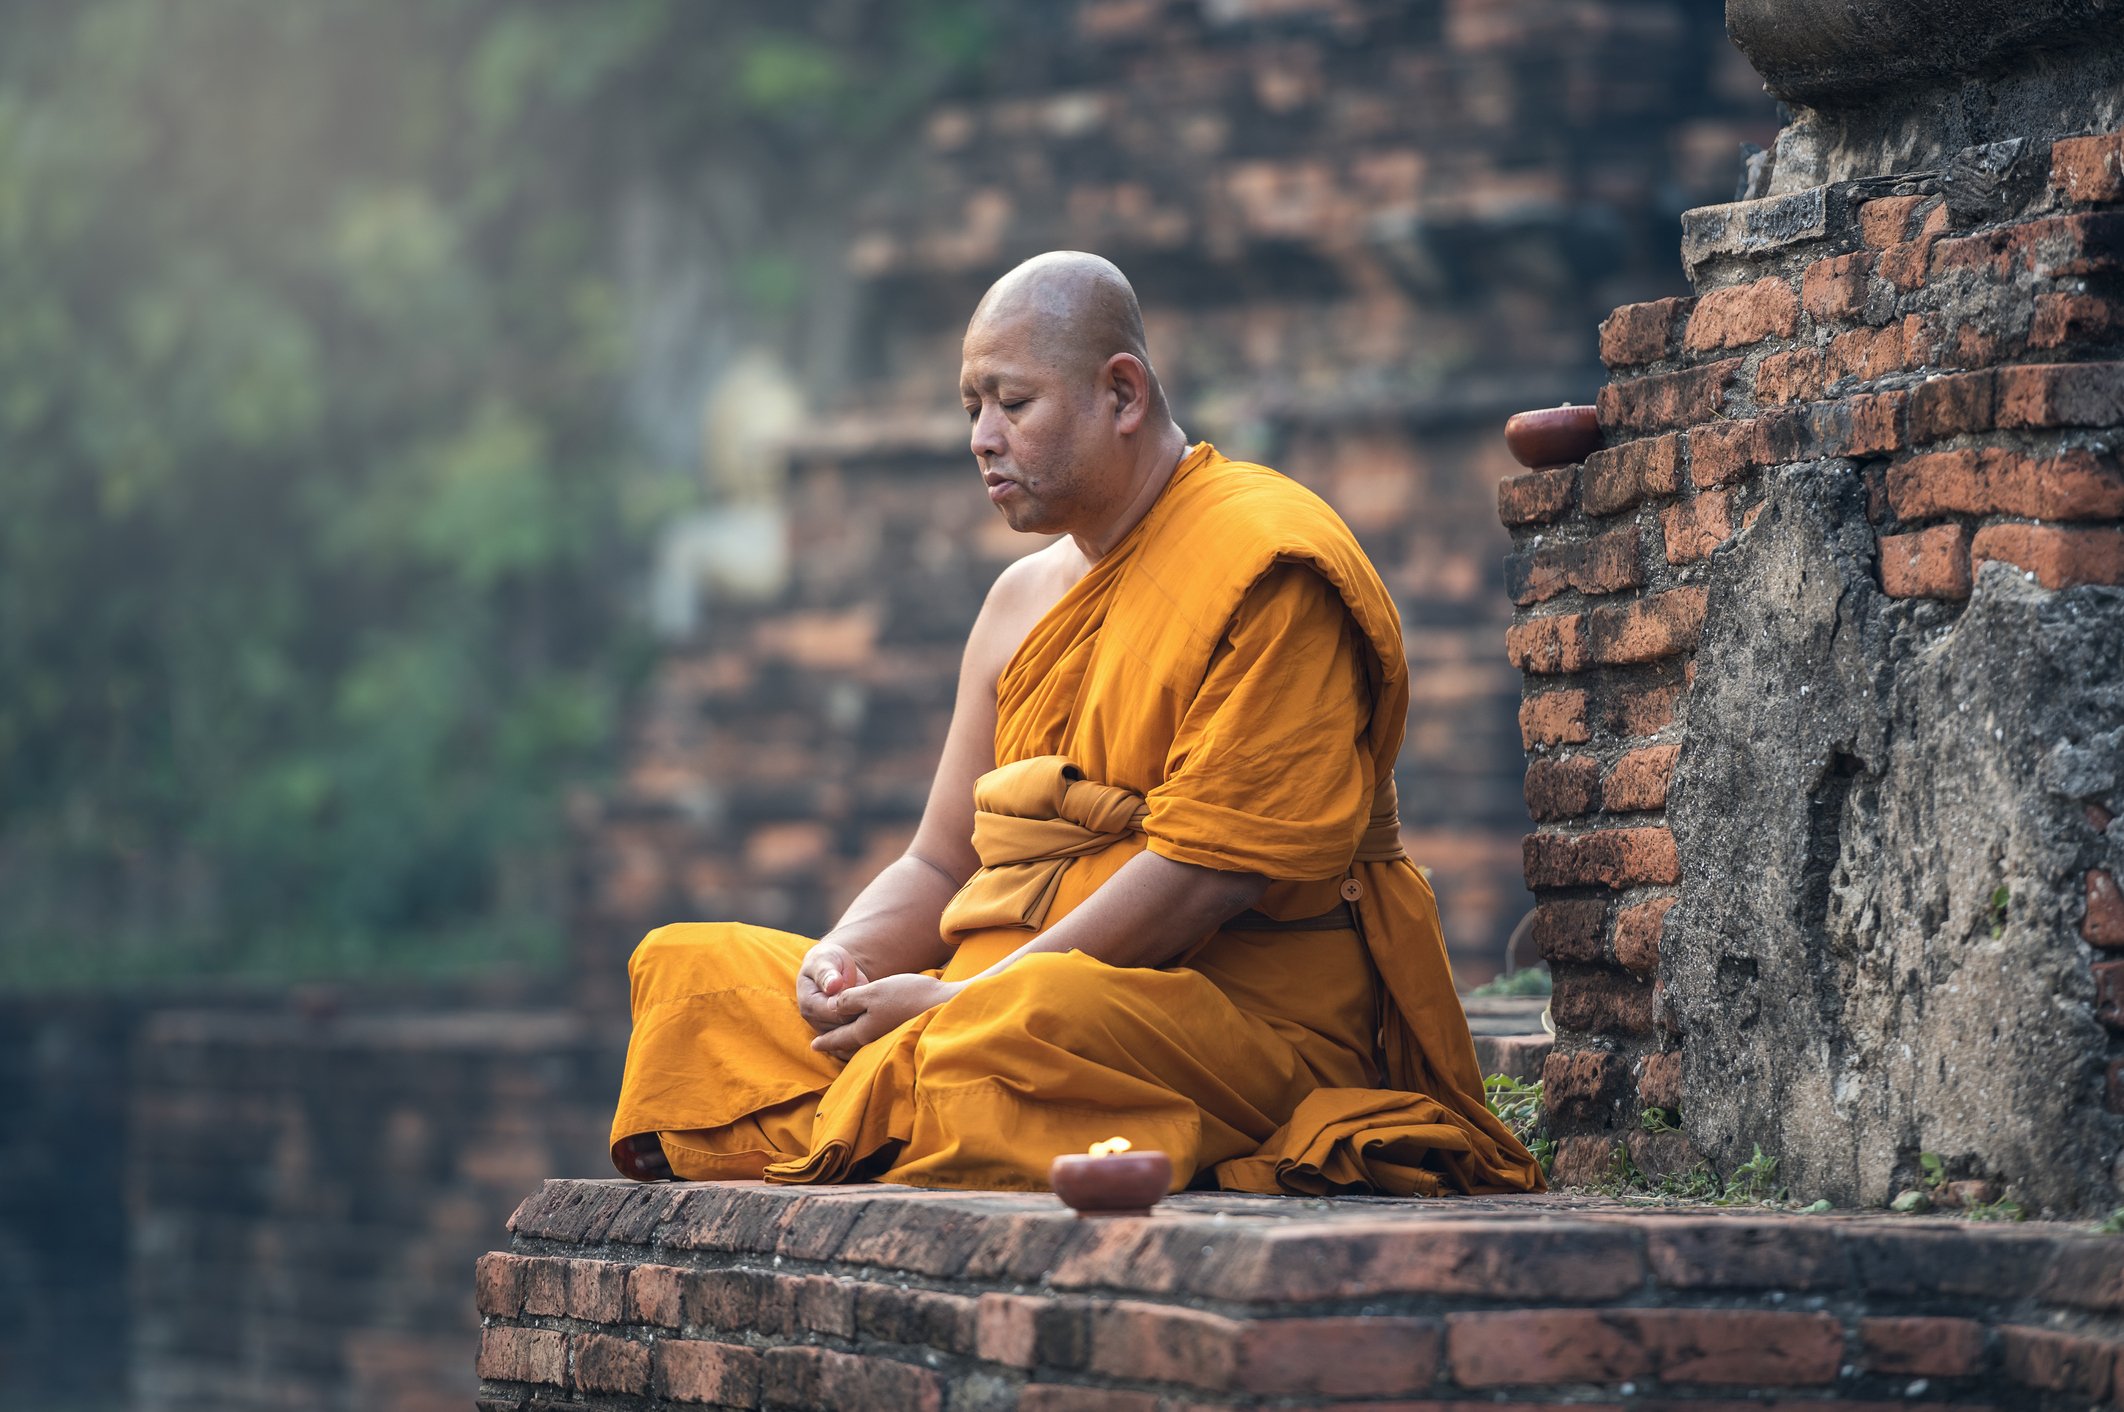 A portrait of a monk meditating in the temple. | Photo: Getty Images